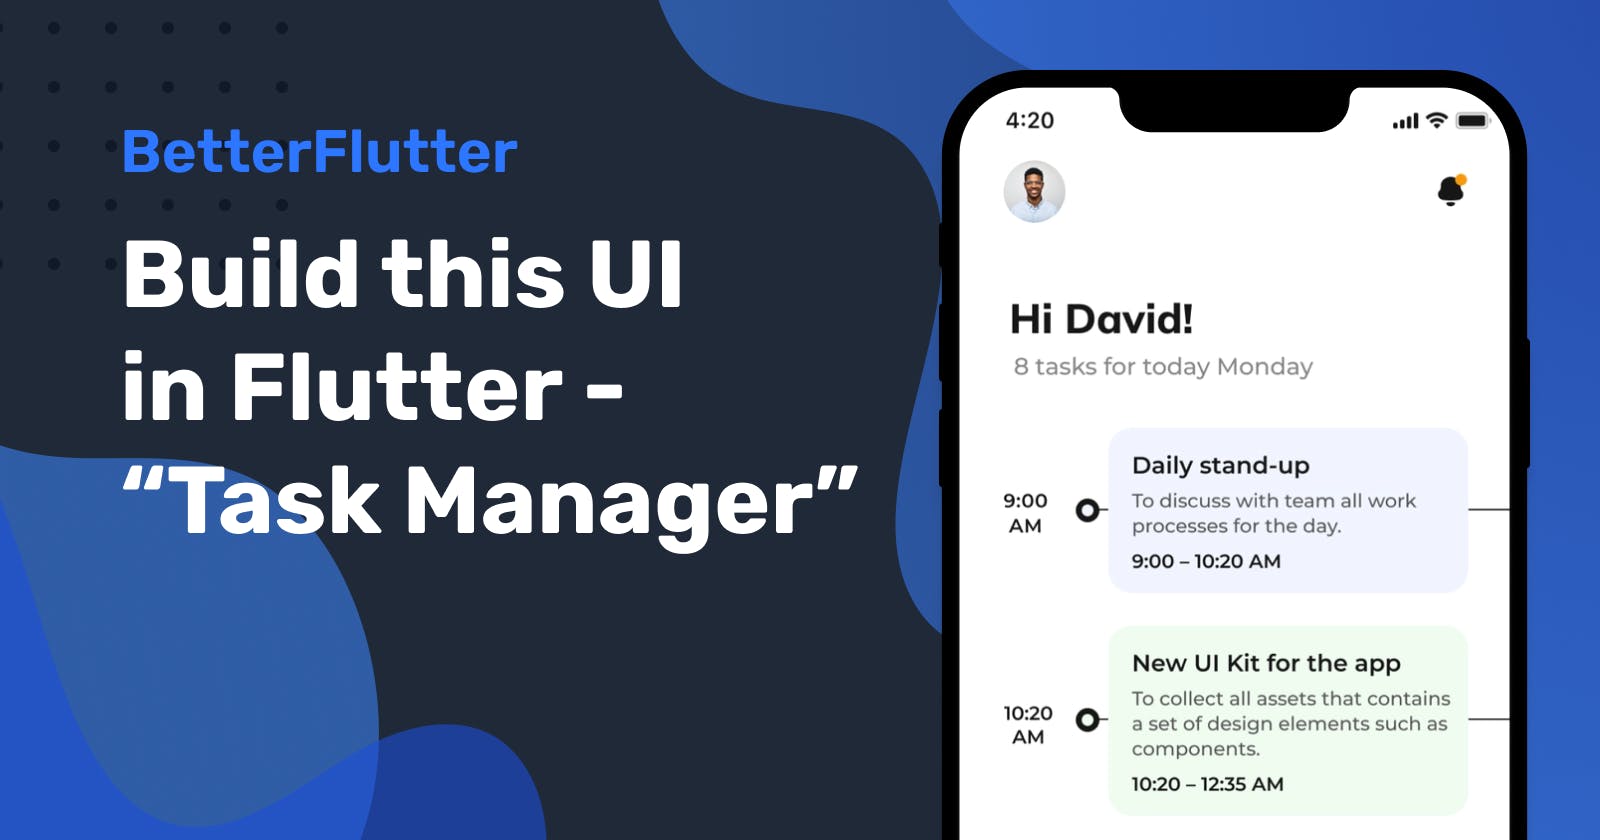 Build this UI in Flutter - Task Manager